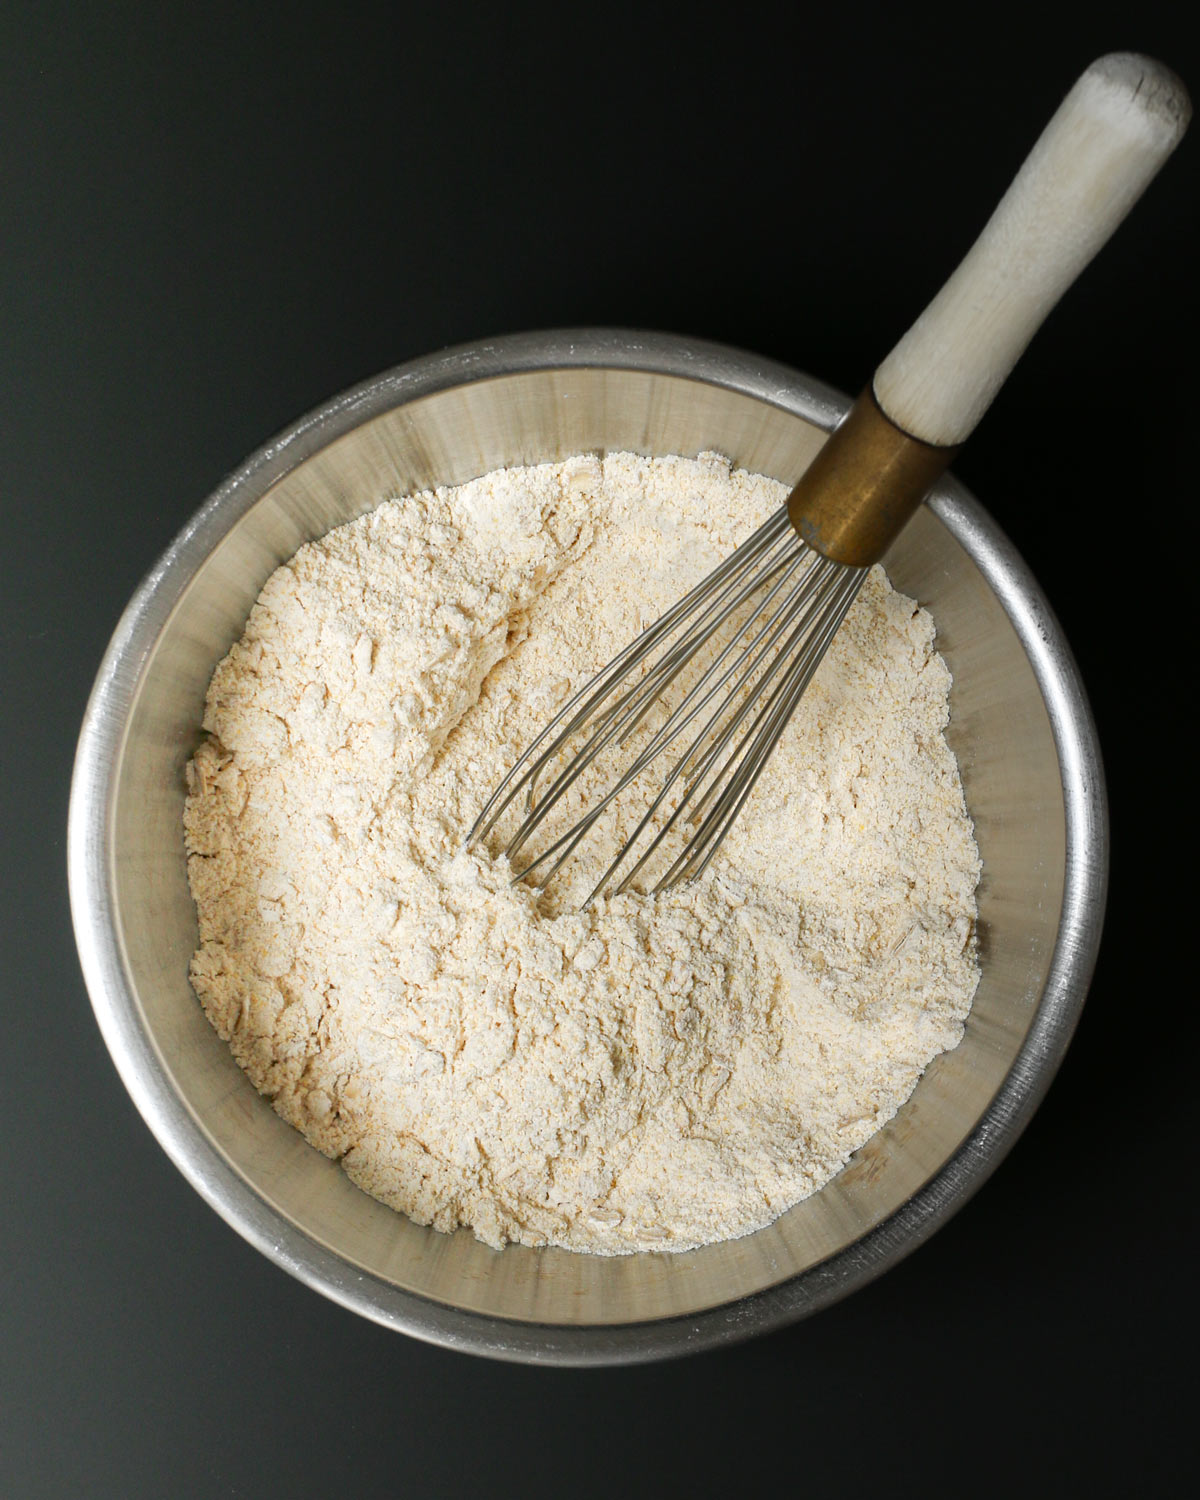 a whisk submerged into the combined ingredients in the bowl.